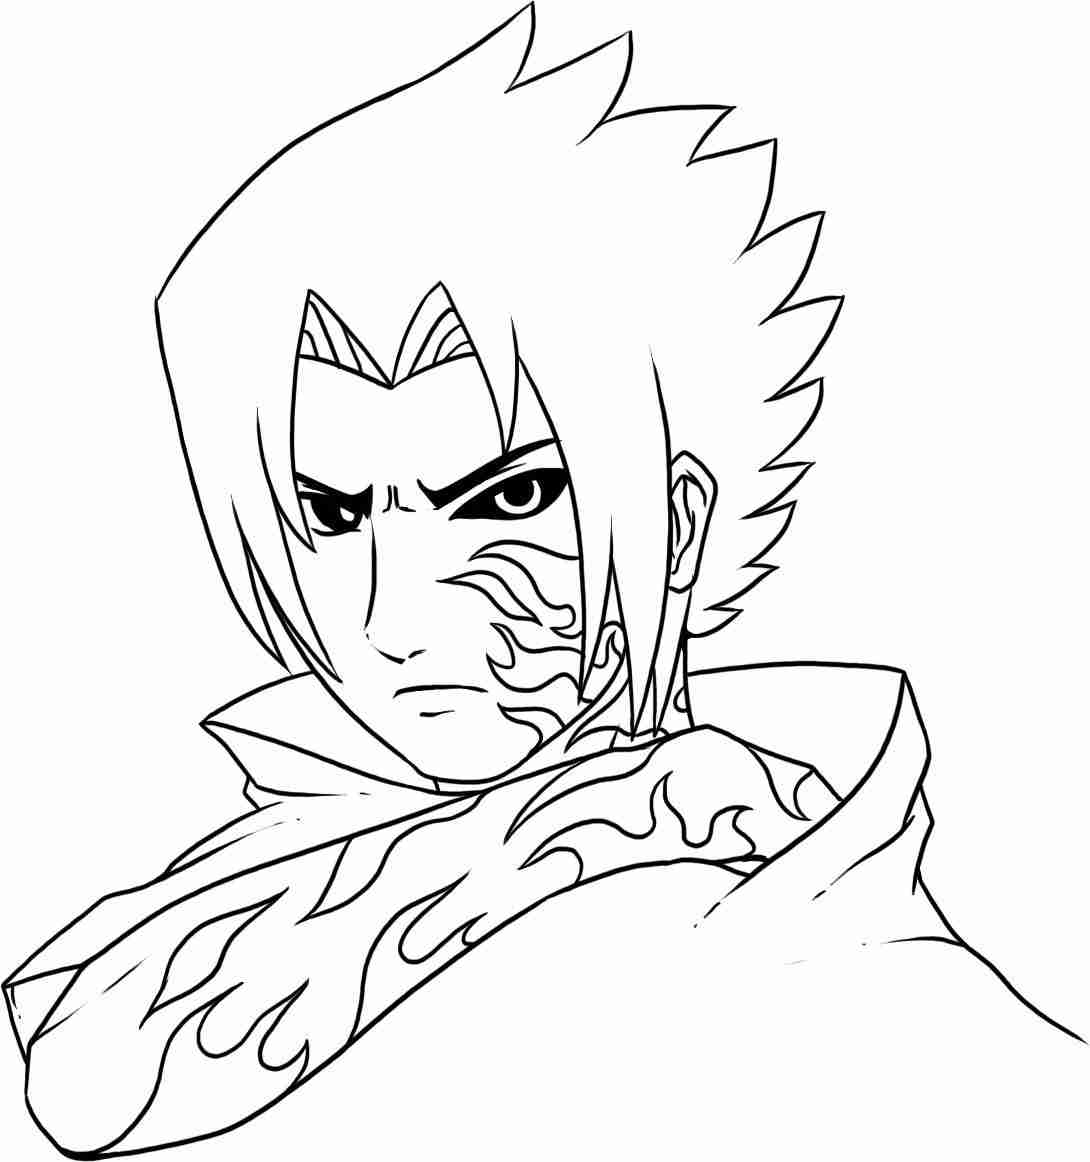 Sasuke filled a half of special Curse Mark on his face and arm Coloring Page